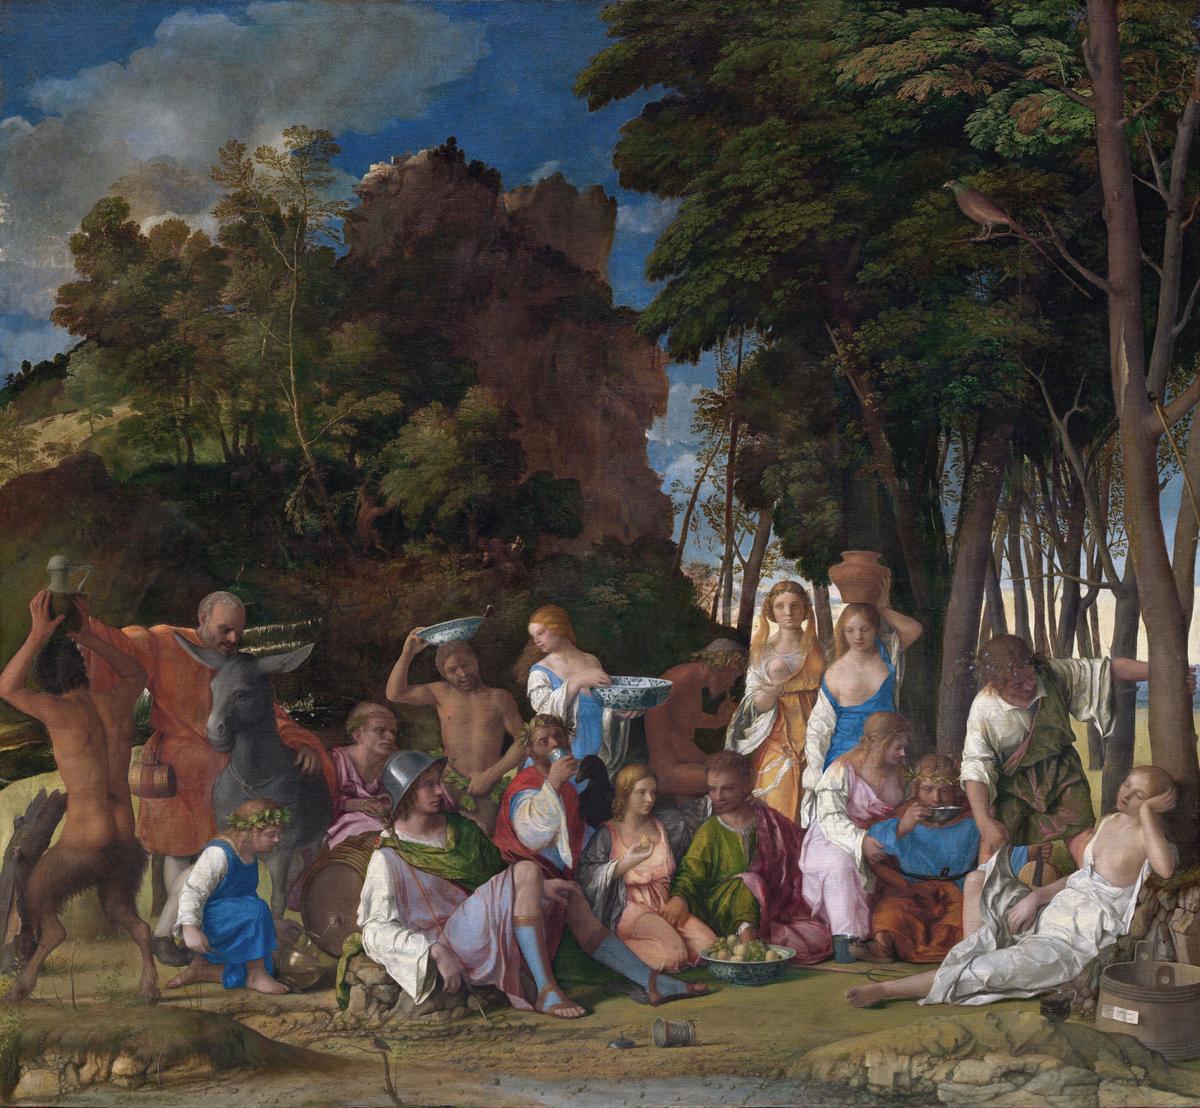 "Feast of the Gods" by Giovanni Bellini and Titian, 1514 (Titian's additions in 1529). Oil on canvas. National Gallery of Art, Washington D.C.